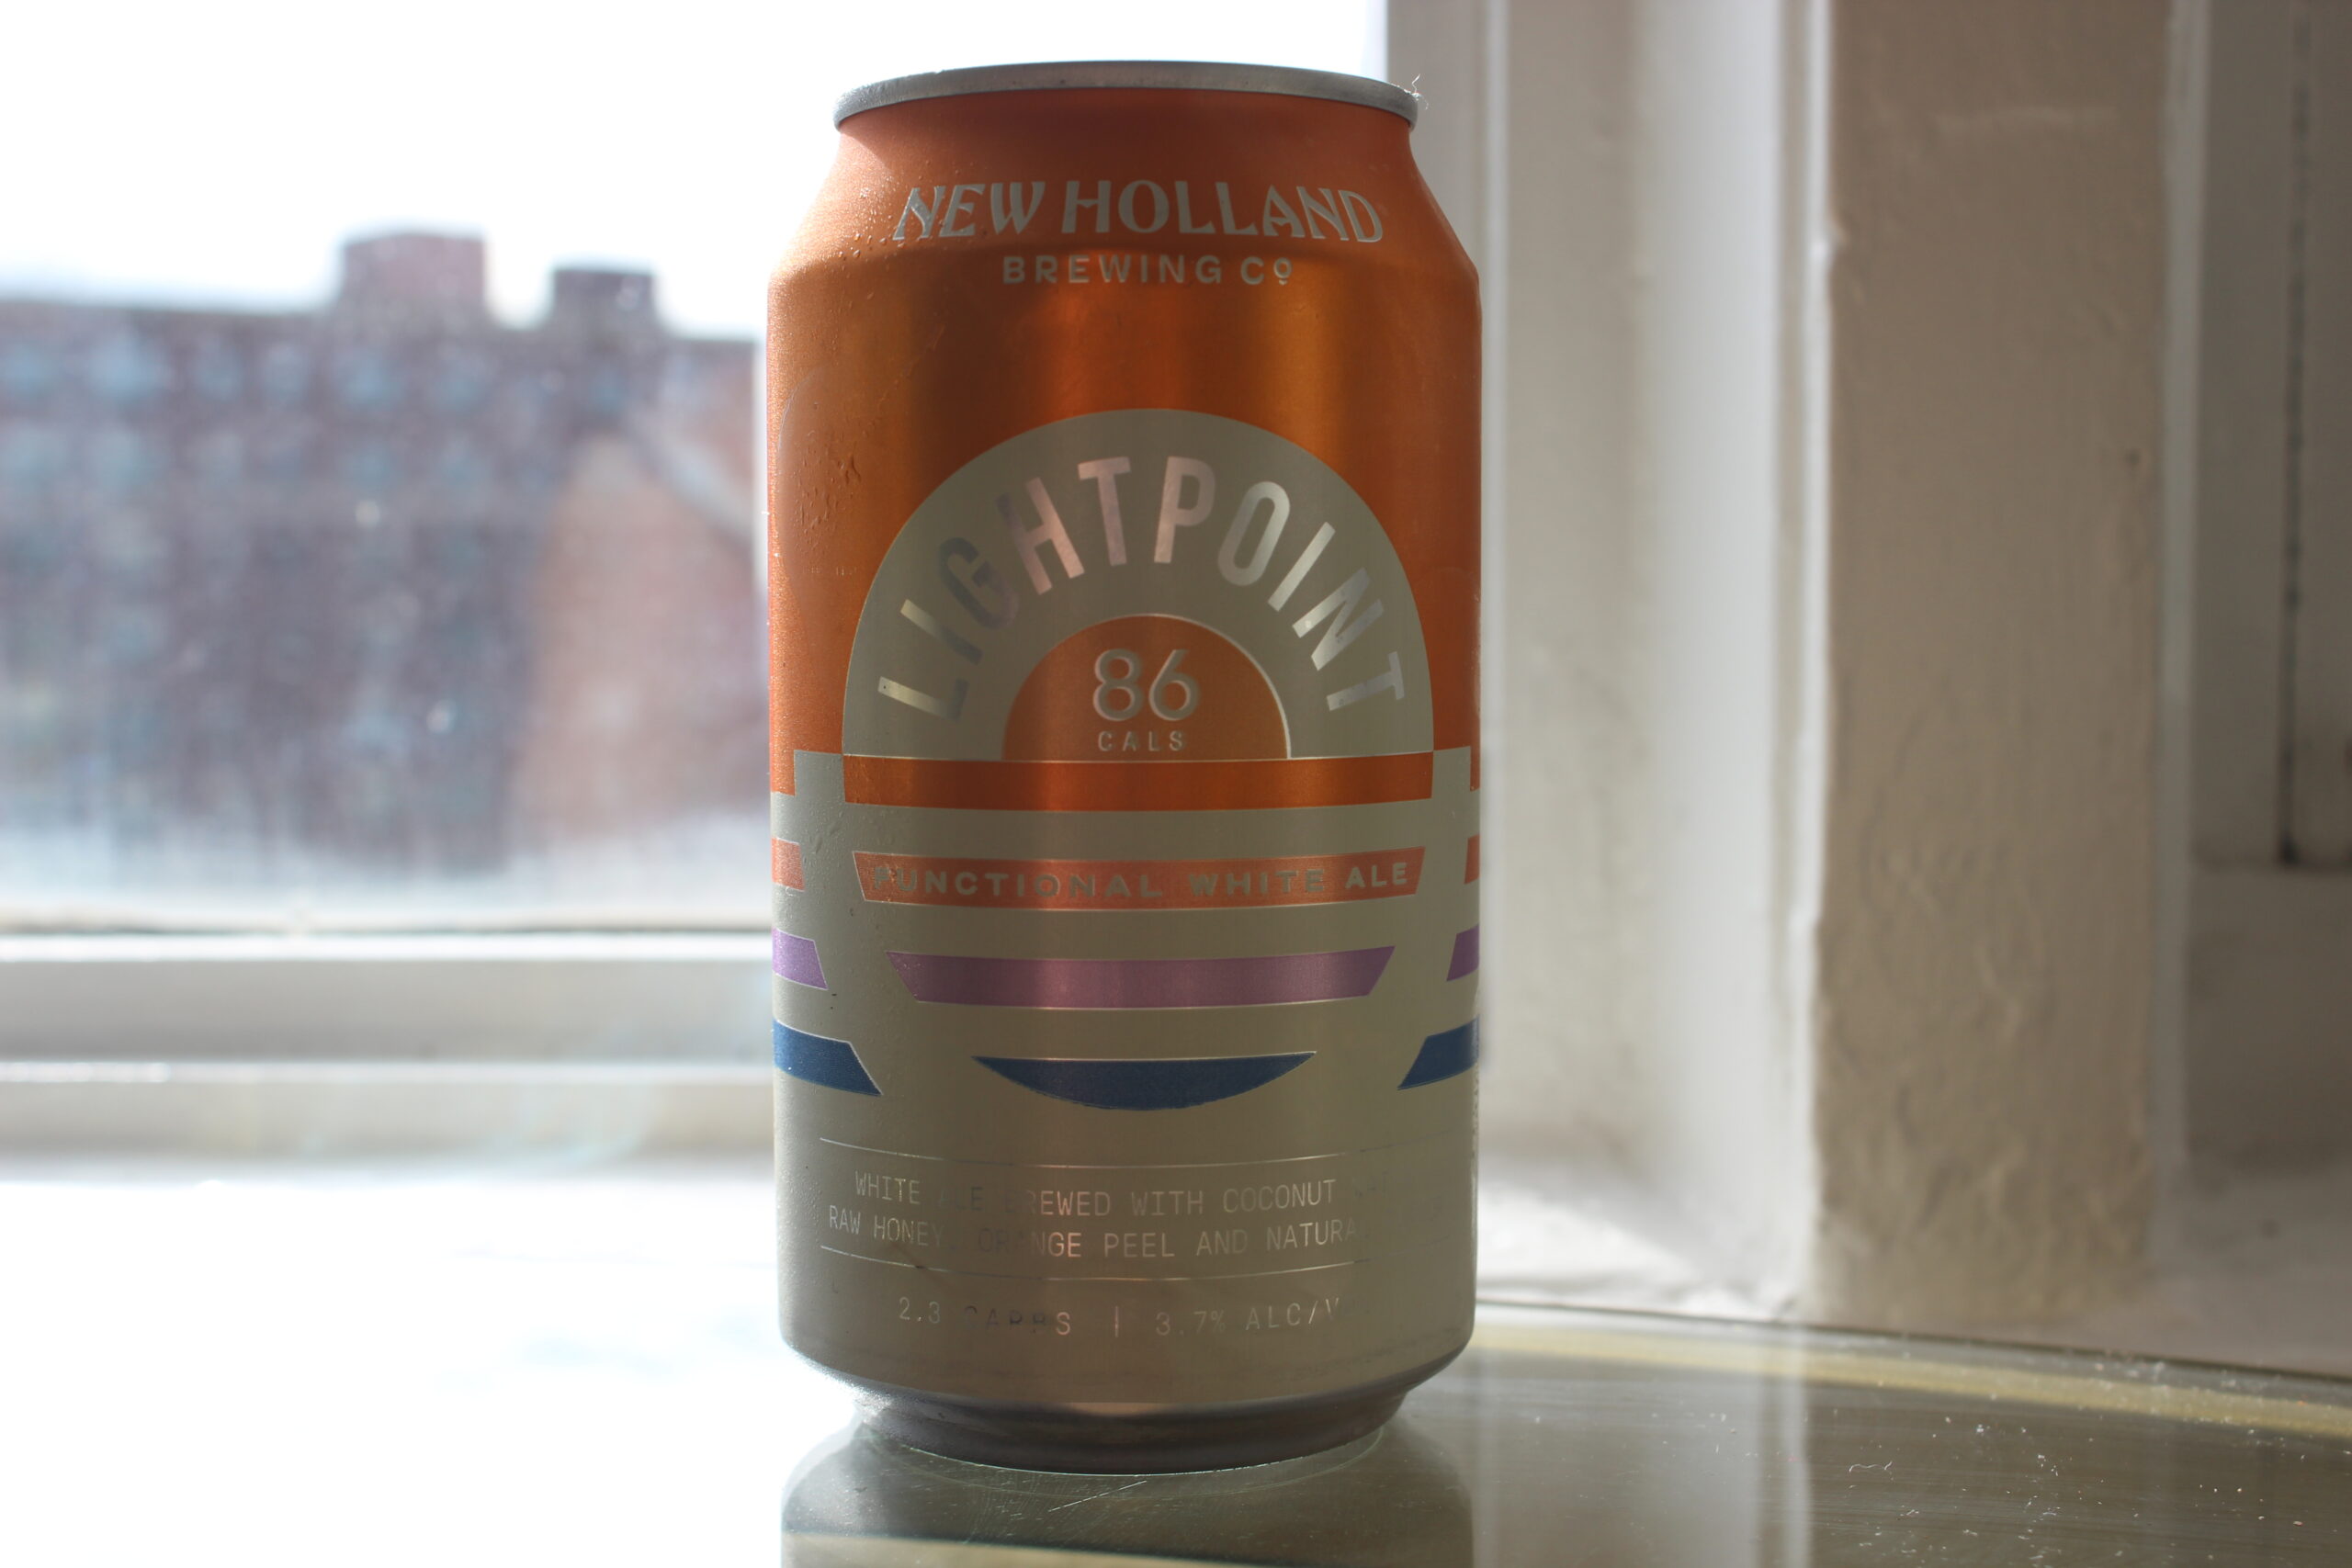 Lightpoint Functional White Ale